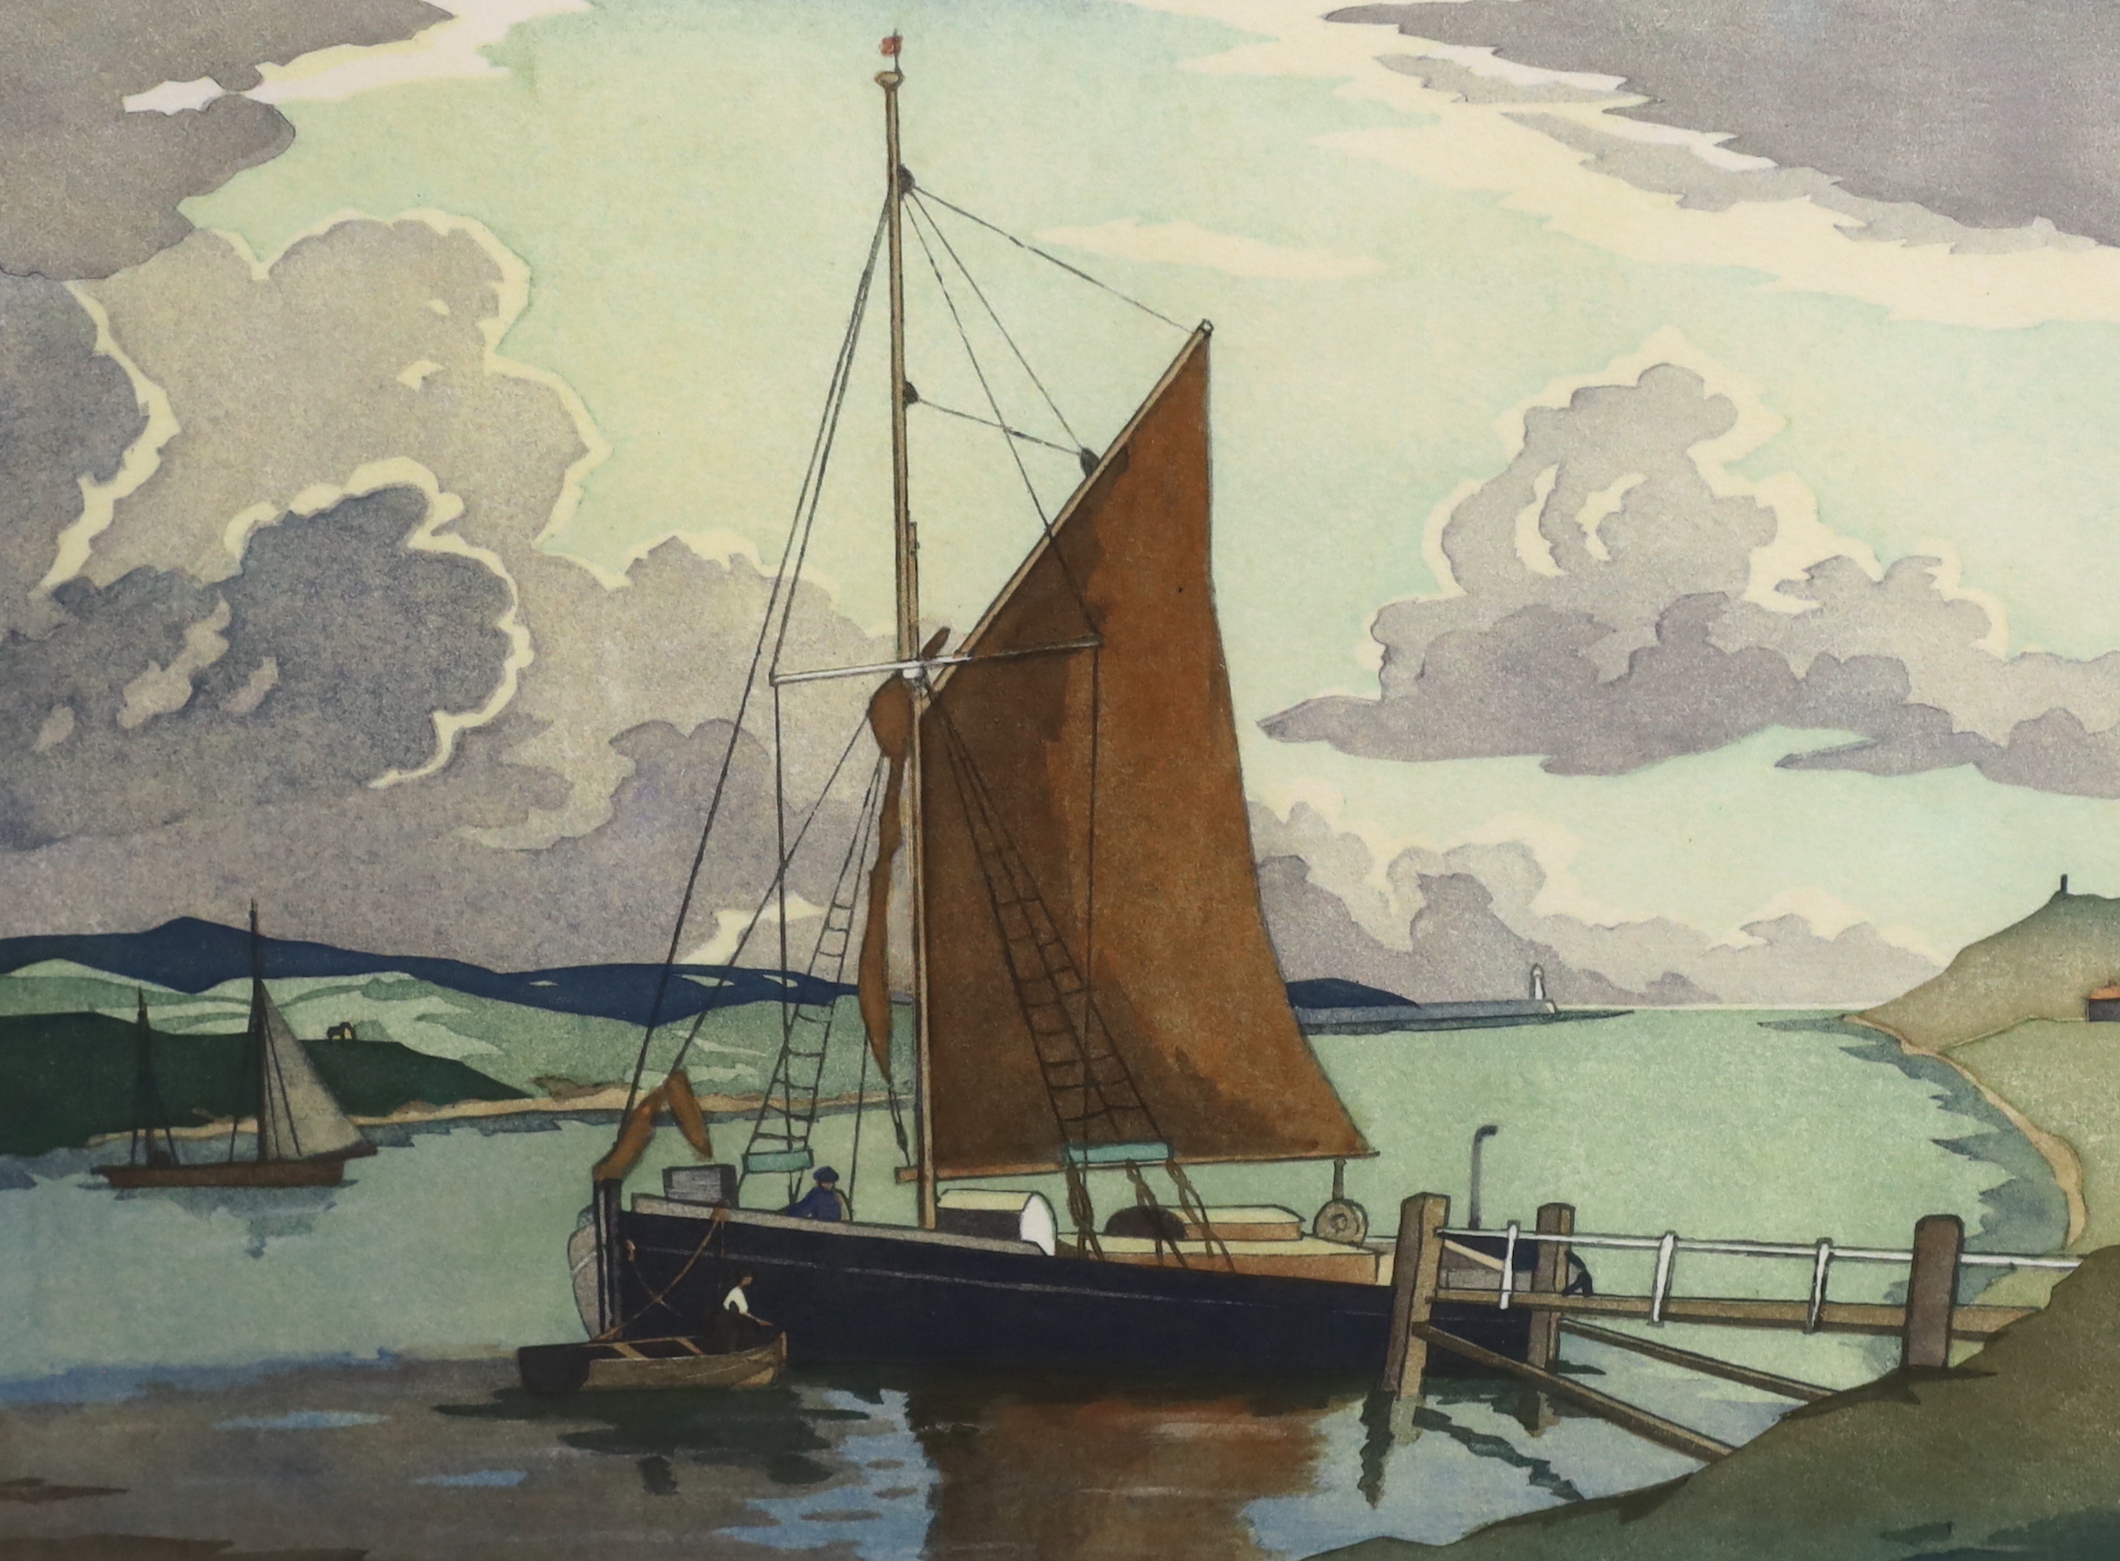 Eric Slater (British, 1896-1963), giclee print, limited edition 15/250, Morning calm, details and signature verso, 29 x 38cm